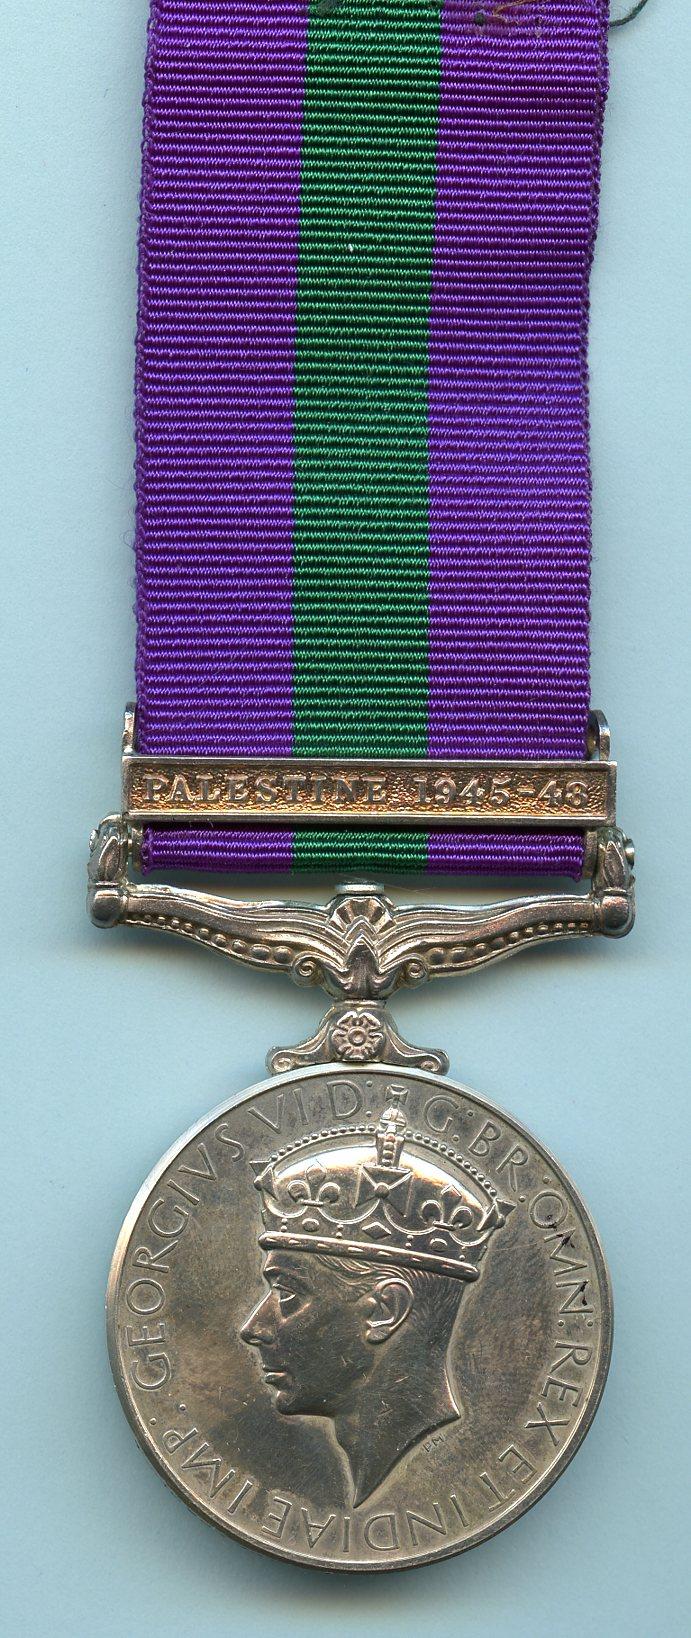 General Service Medal 1918-62 1 Clasp Palestine 1945-48 L/Cpl D F Potts, Royal Army Service Corps